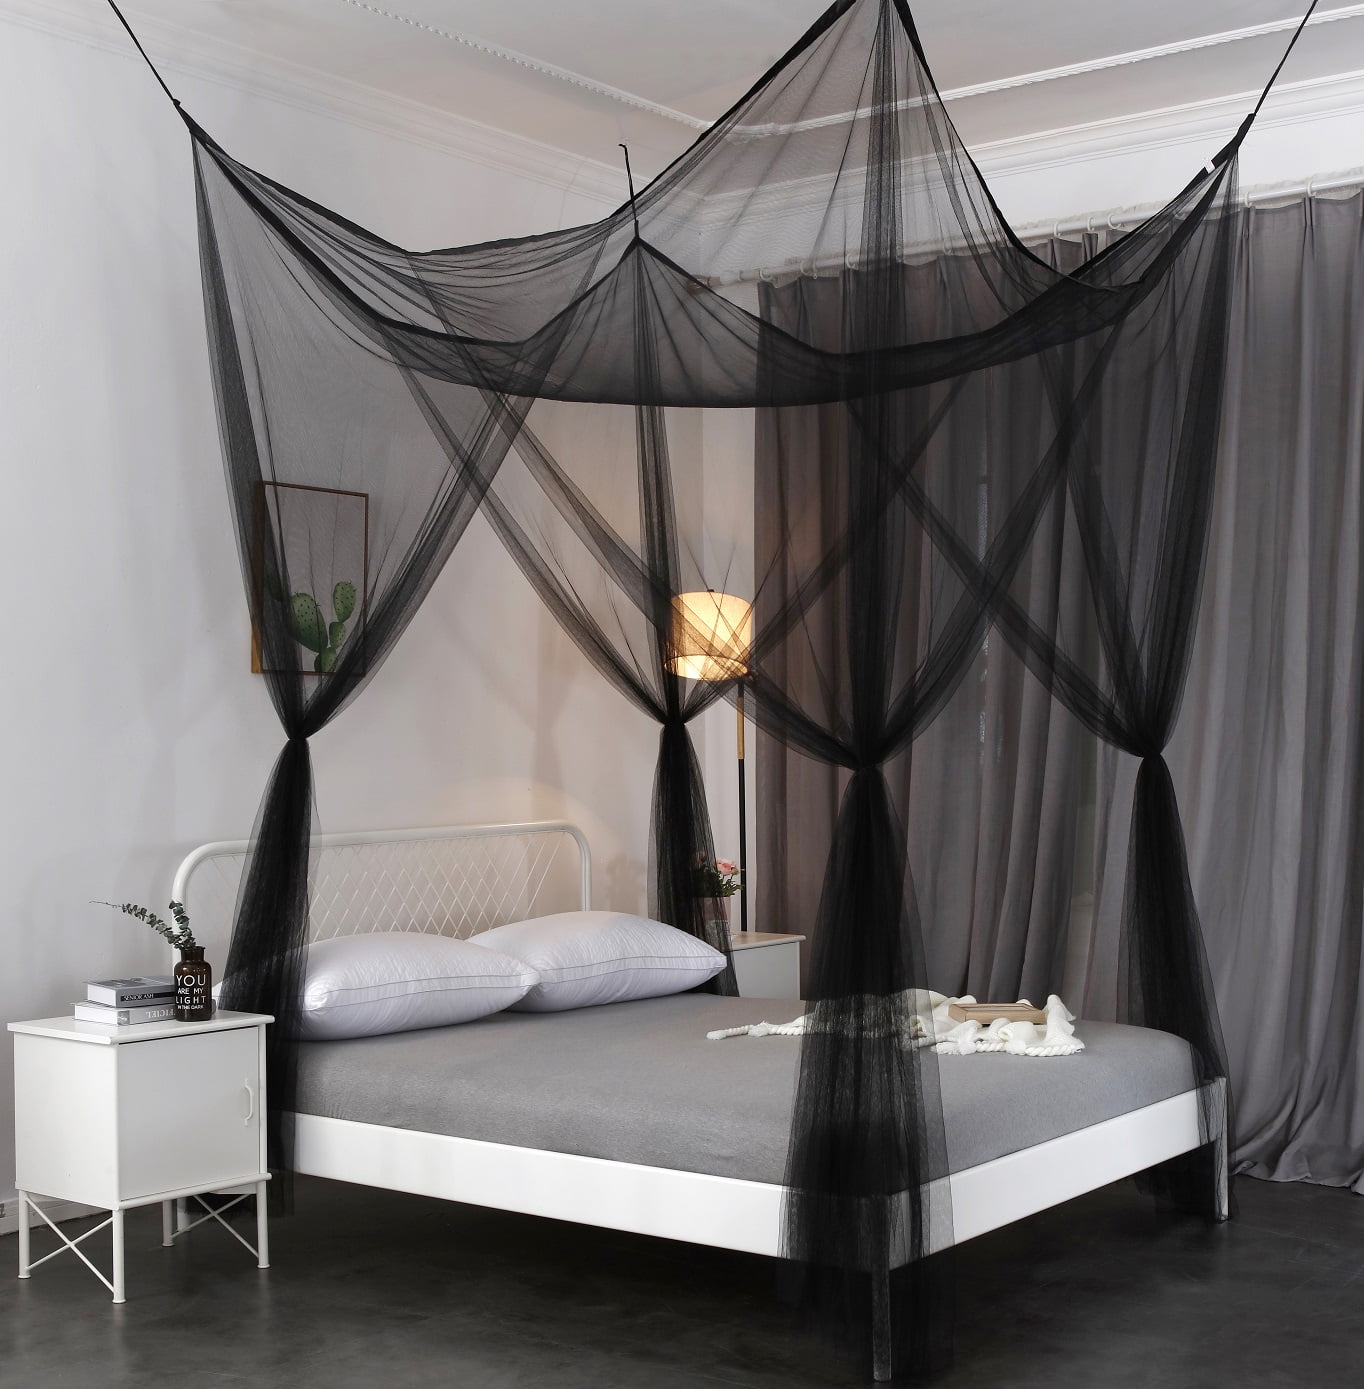 4 Corner Post Bed Canopy Mosquito Net For Full Queen King Size Netting 3 Colors 